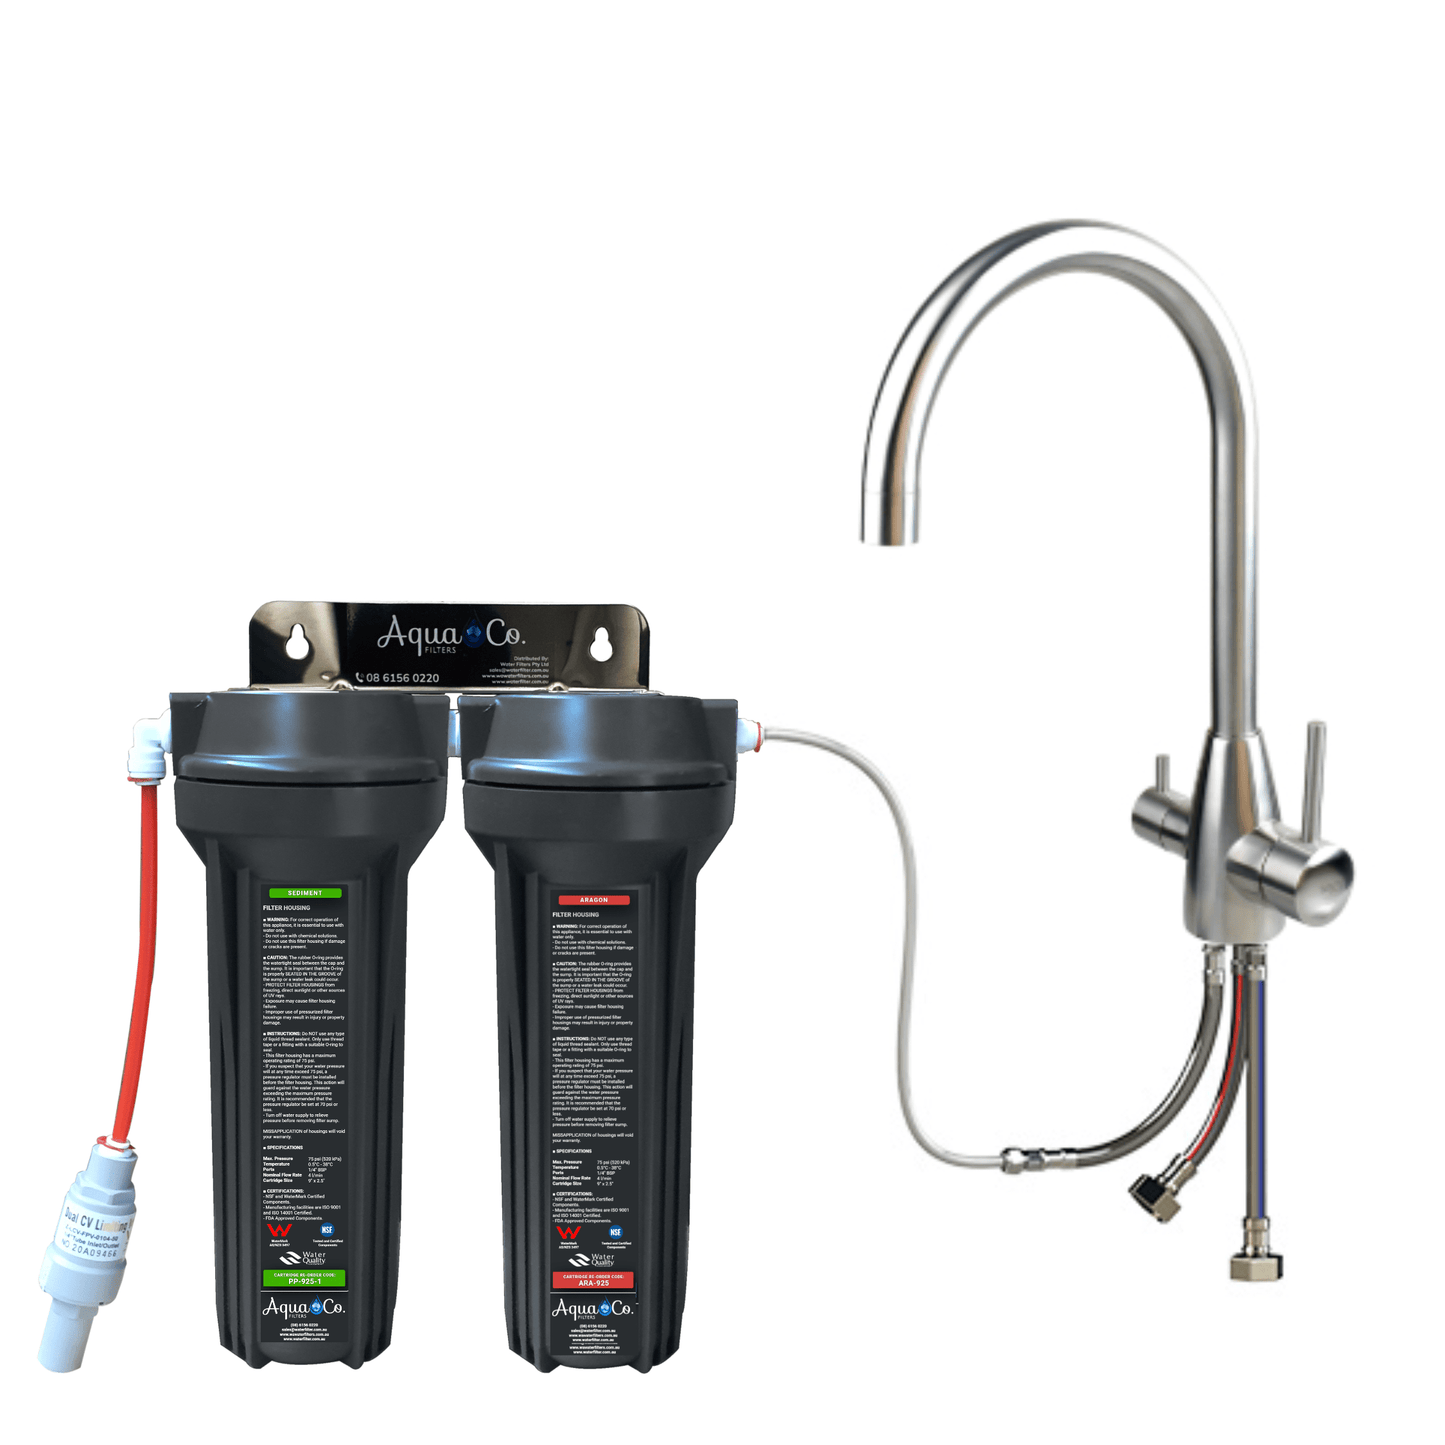 3 Way Mixer Tap with AquaCo SYS-925SA Undersink Water Filter - Reduces Chlorine, Taste, Odours, Parasites, Bacteria and Lead.